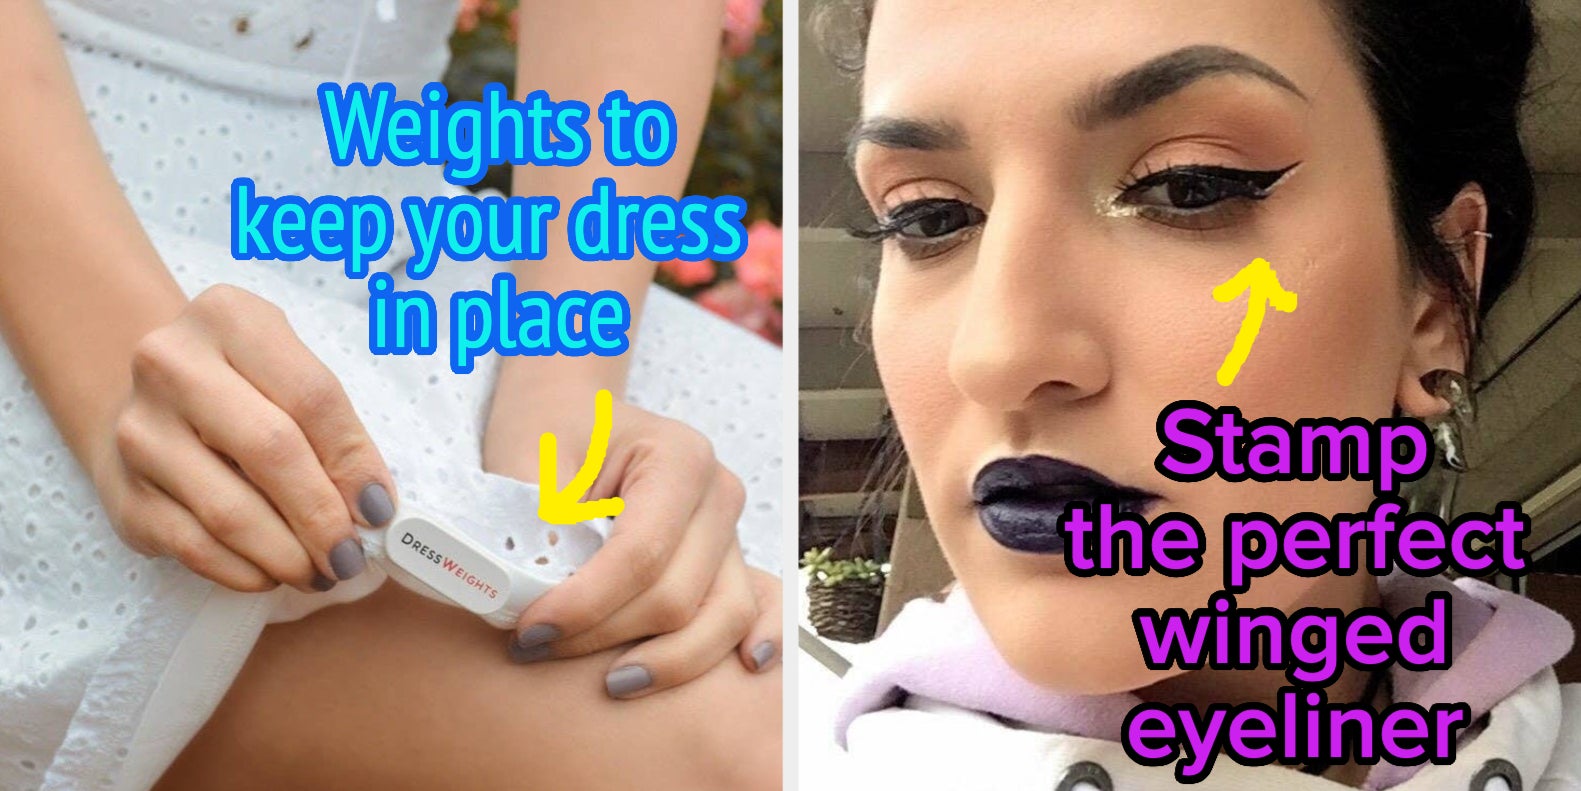 37 Products To Help With Your Beauty And Fashion Probs